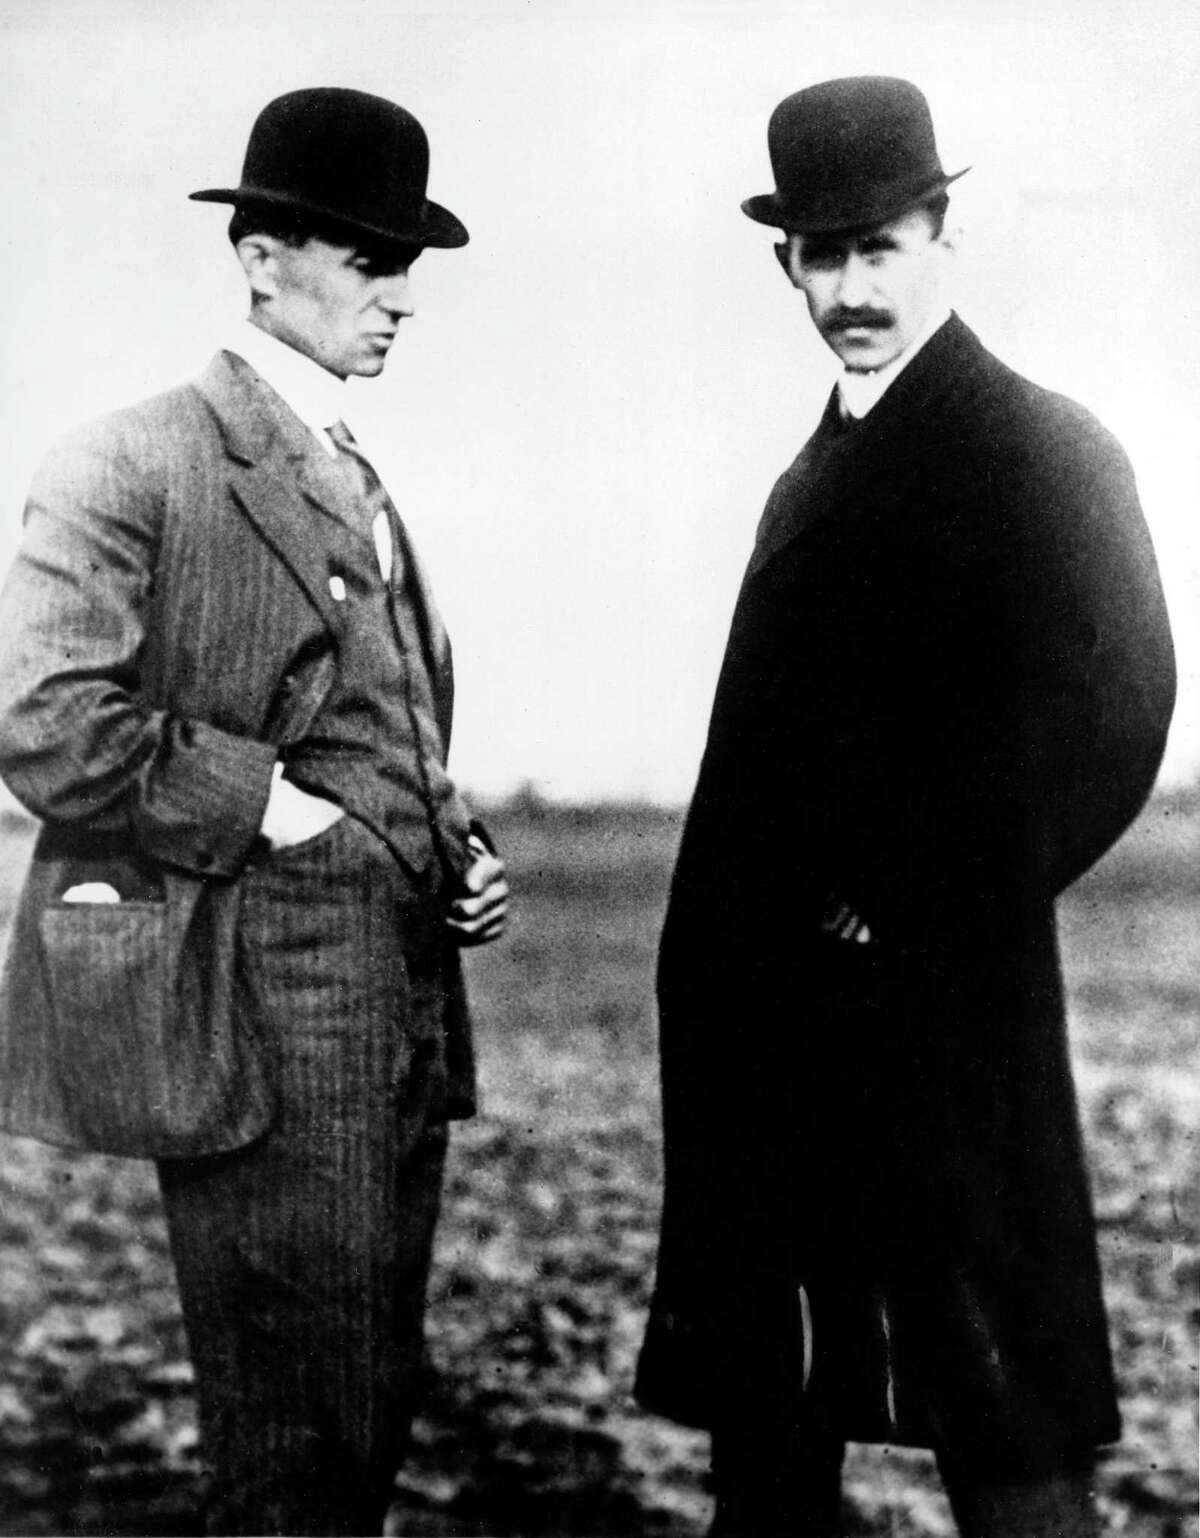 Wilbur Wright, left, and Orville Wright are shown in this undated file photo.The Wright brothers worked together to build and fly the first Wright Biplane, which made a successful flight on December 17, 1903 at Kill Devil Hills near Kitty Hawk, North Carolina.